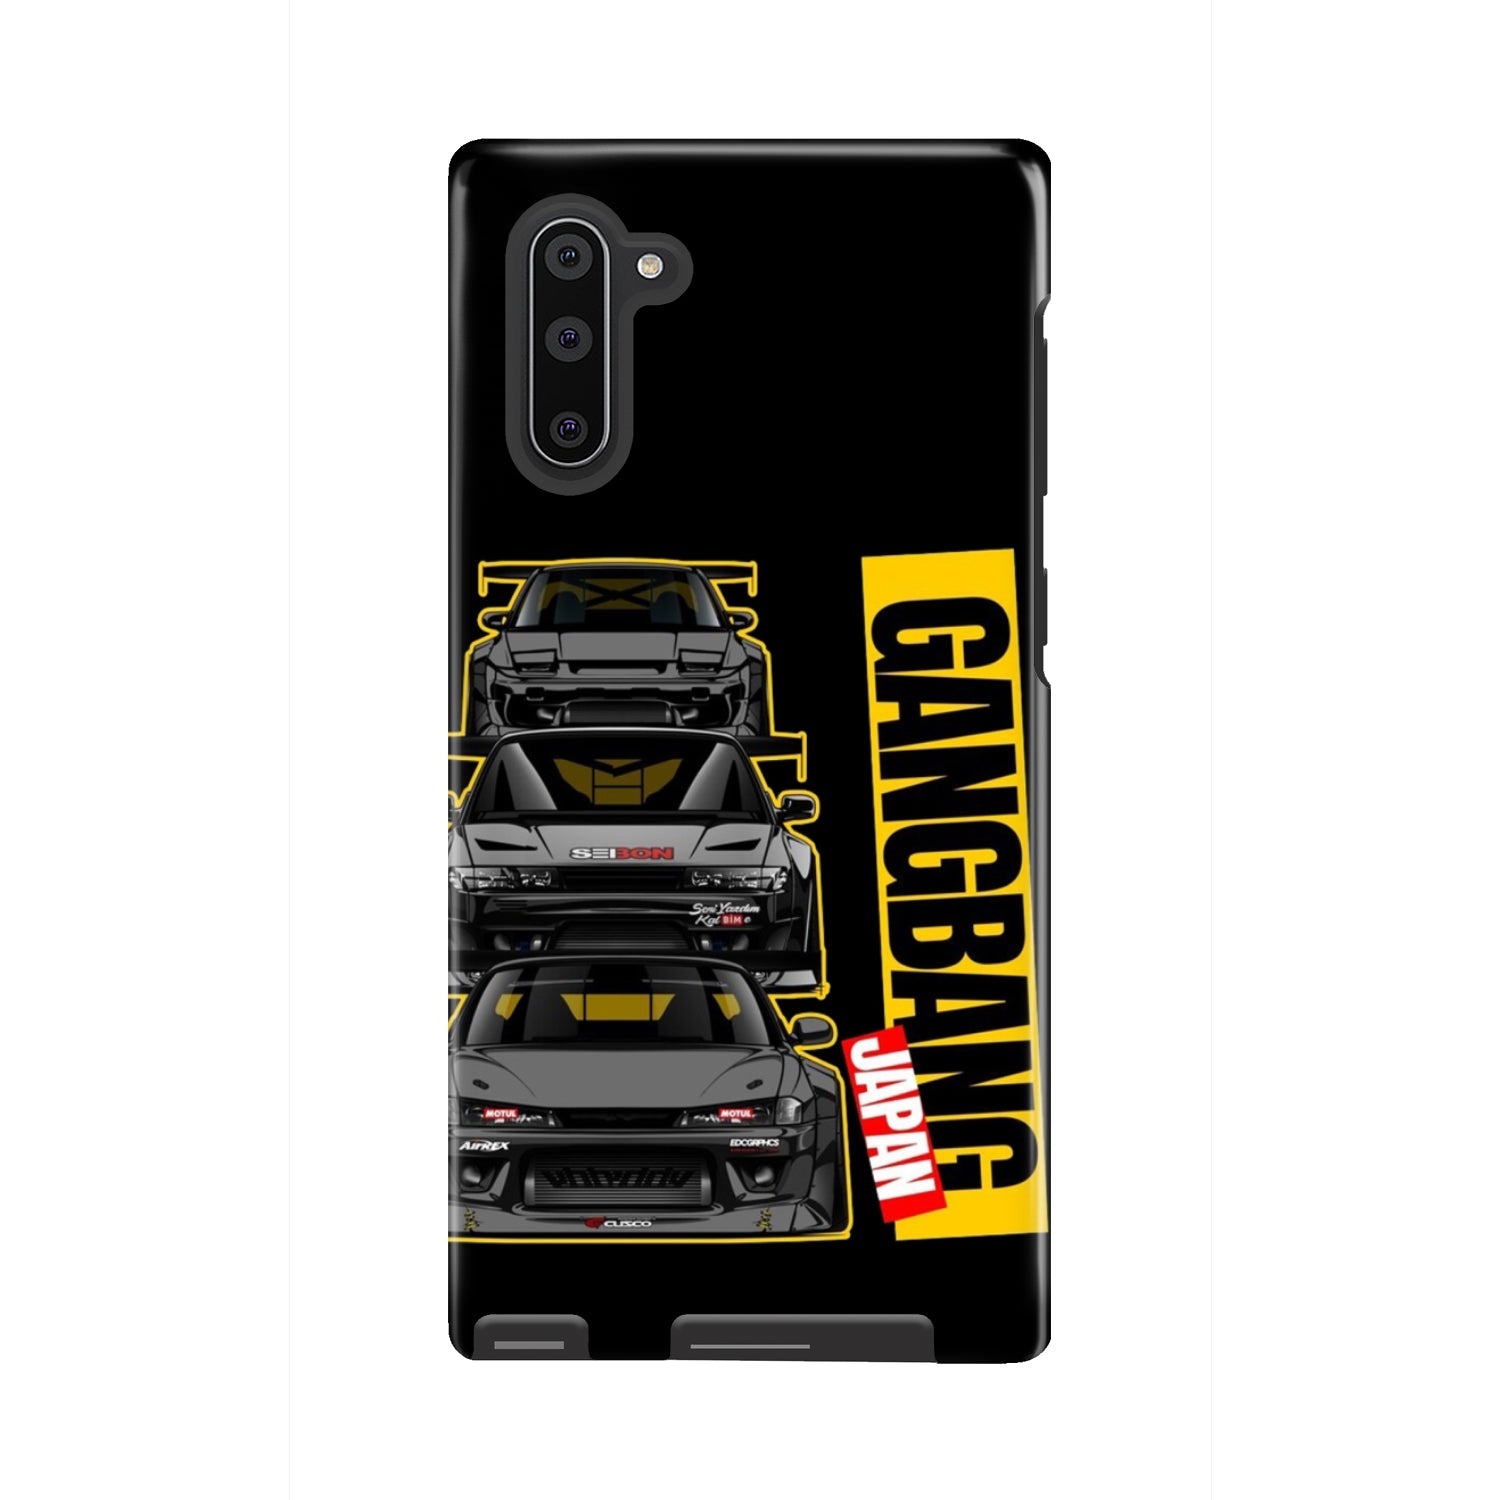 Nissan S-Chassis Phone Case